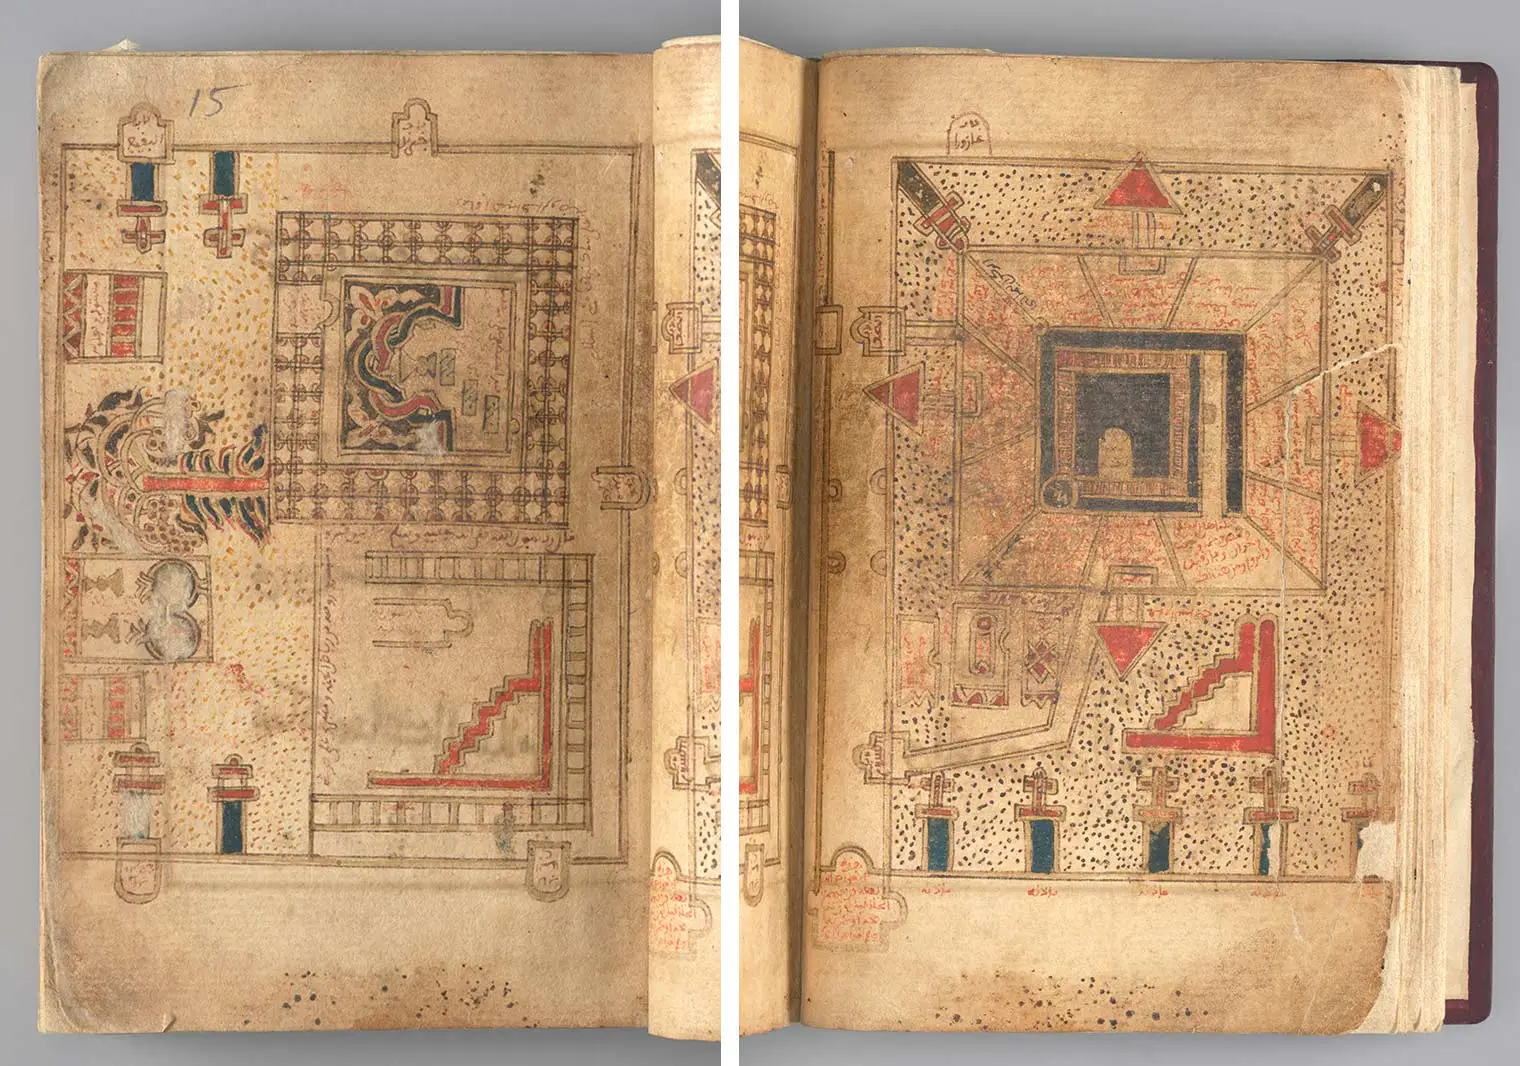 Double page depicting the Holy Sanctuaries in Mecca and Medina, from a Dala’il al-Khayrat manuscript, dated 1629-30. Probably Tunisia. The Metropolitan Museum of Art, Purchase, Friends of Islamic Art Gifts, 2017 (2017.301).